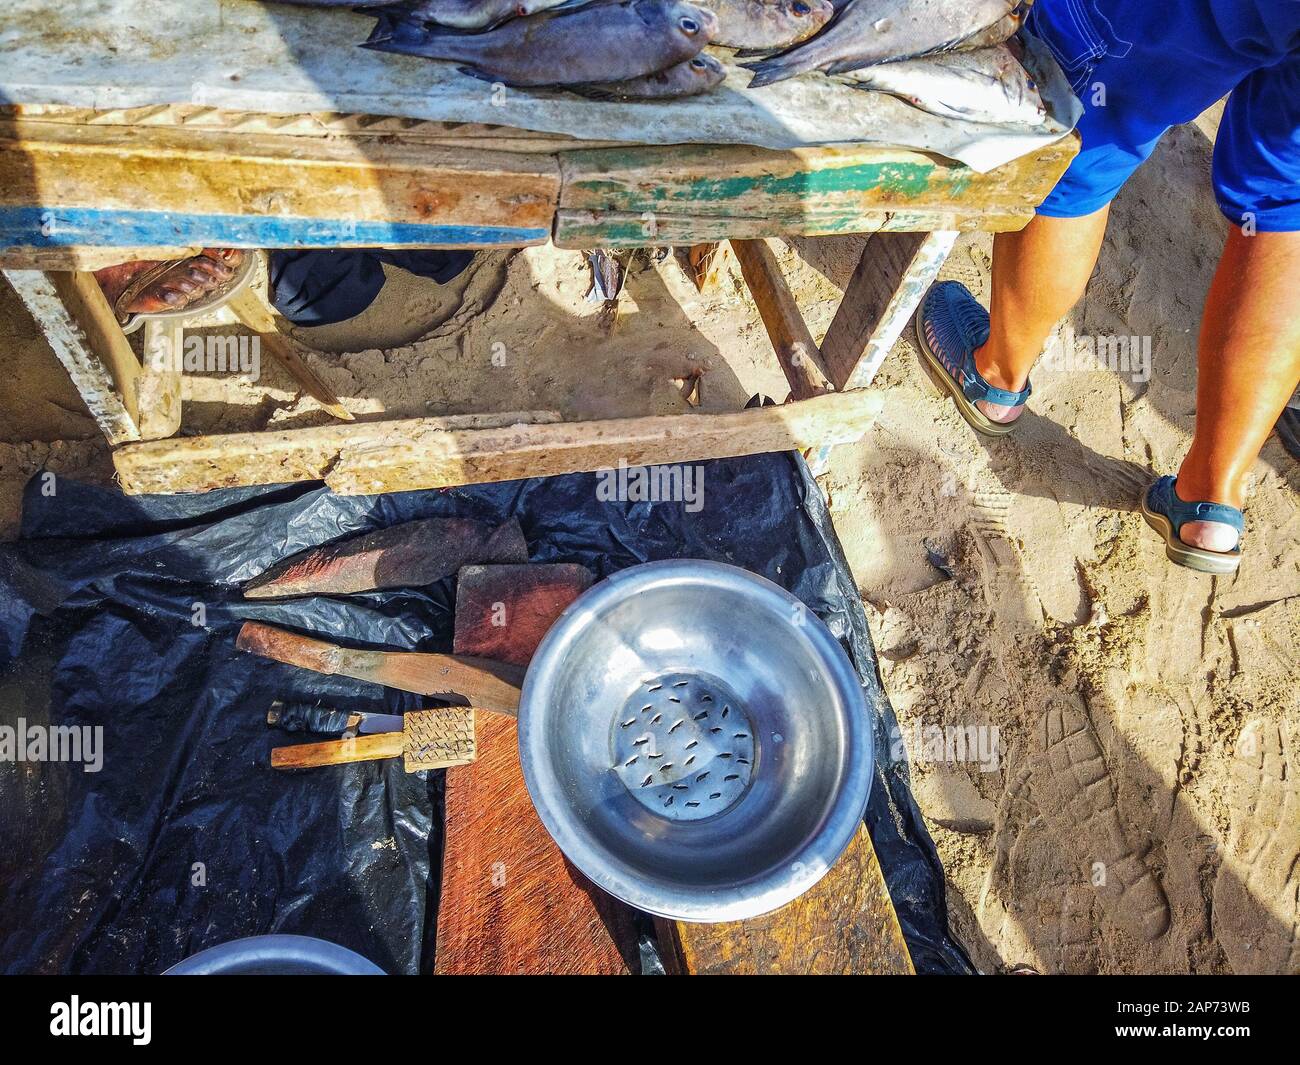 A metal bowl with holes for washing fish lies on a wooden table. It's at the fish market in Mbour, Senegal, Africa. Stock Photo